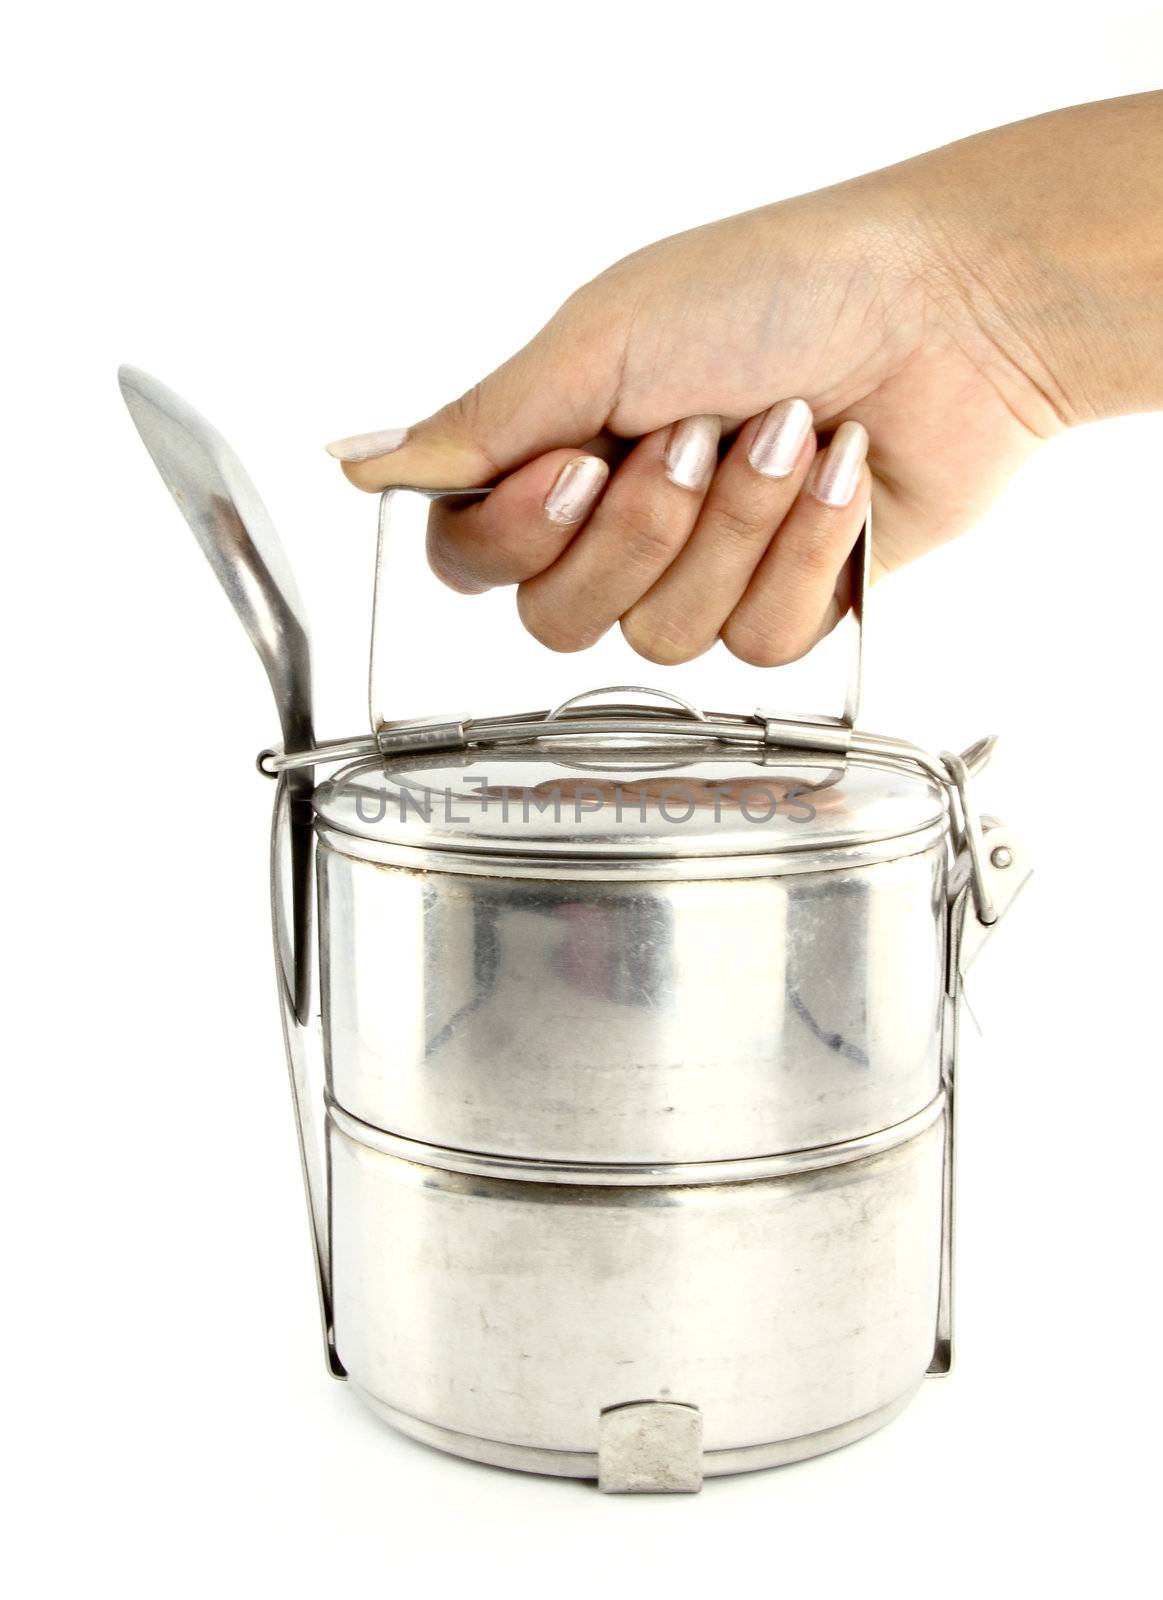 A hand holding silver metal tiffin and spoon, food container on  by geargodz